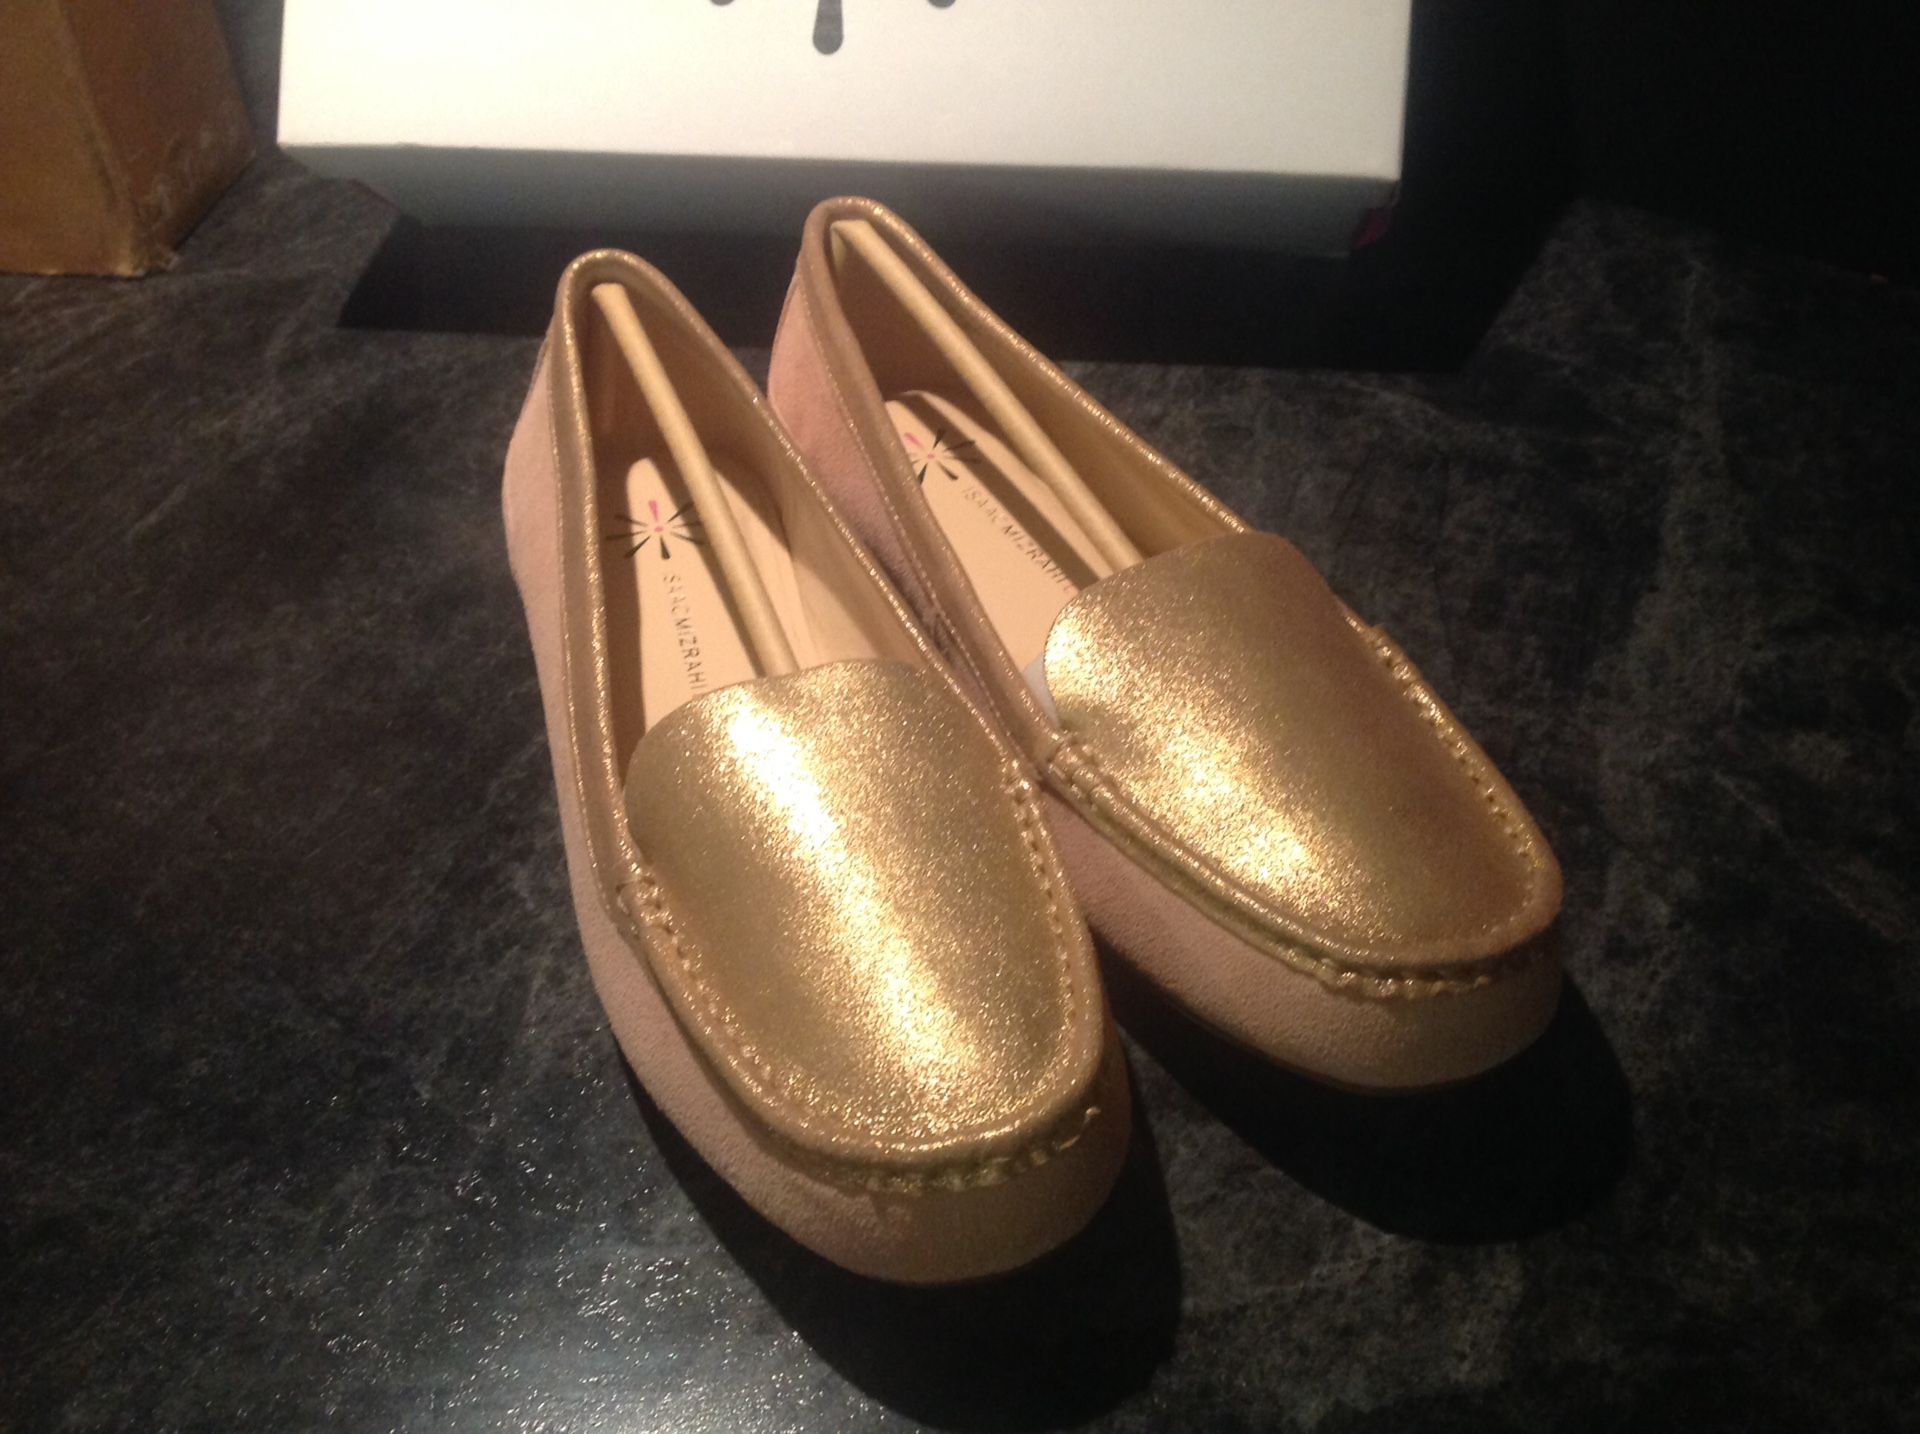 Isaac Mizrahi Gold & Camel Color Women's Shoes/Loafers Women's Size 10 Dress Shoes Brand New Boxed